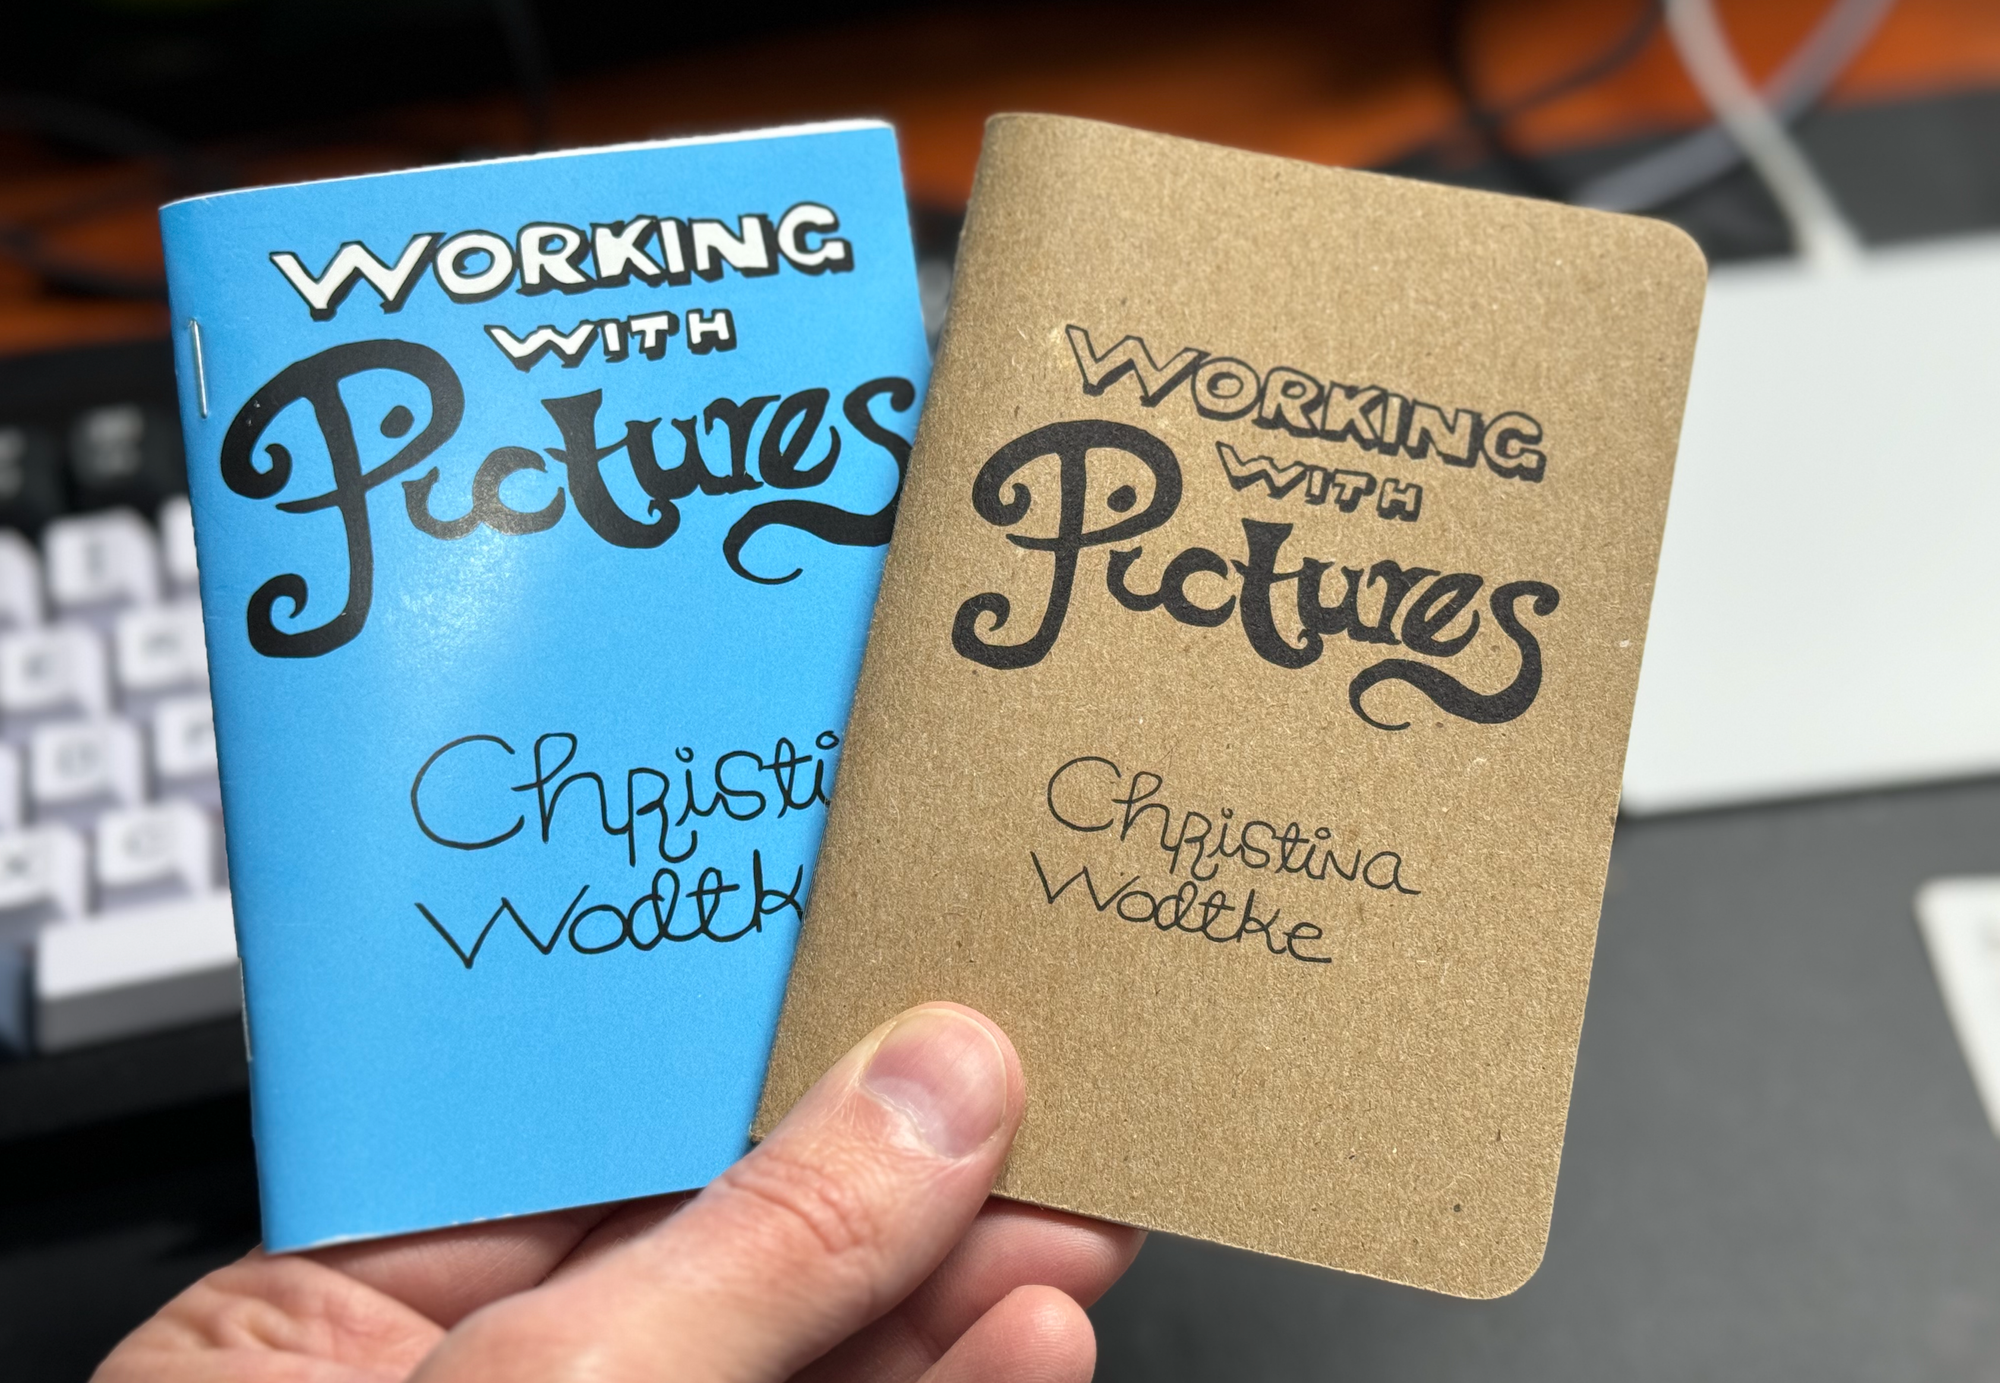 Hand holding two pocket sized books with the title 'Working with Pictures"